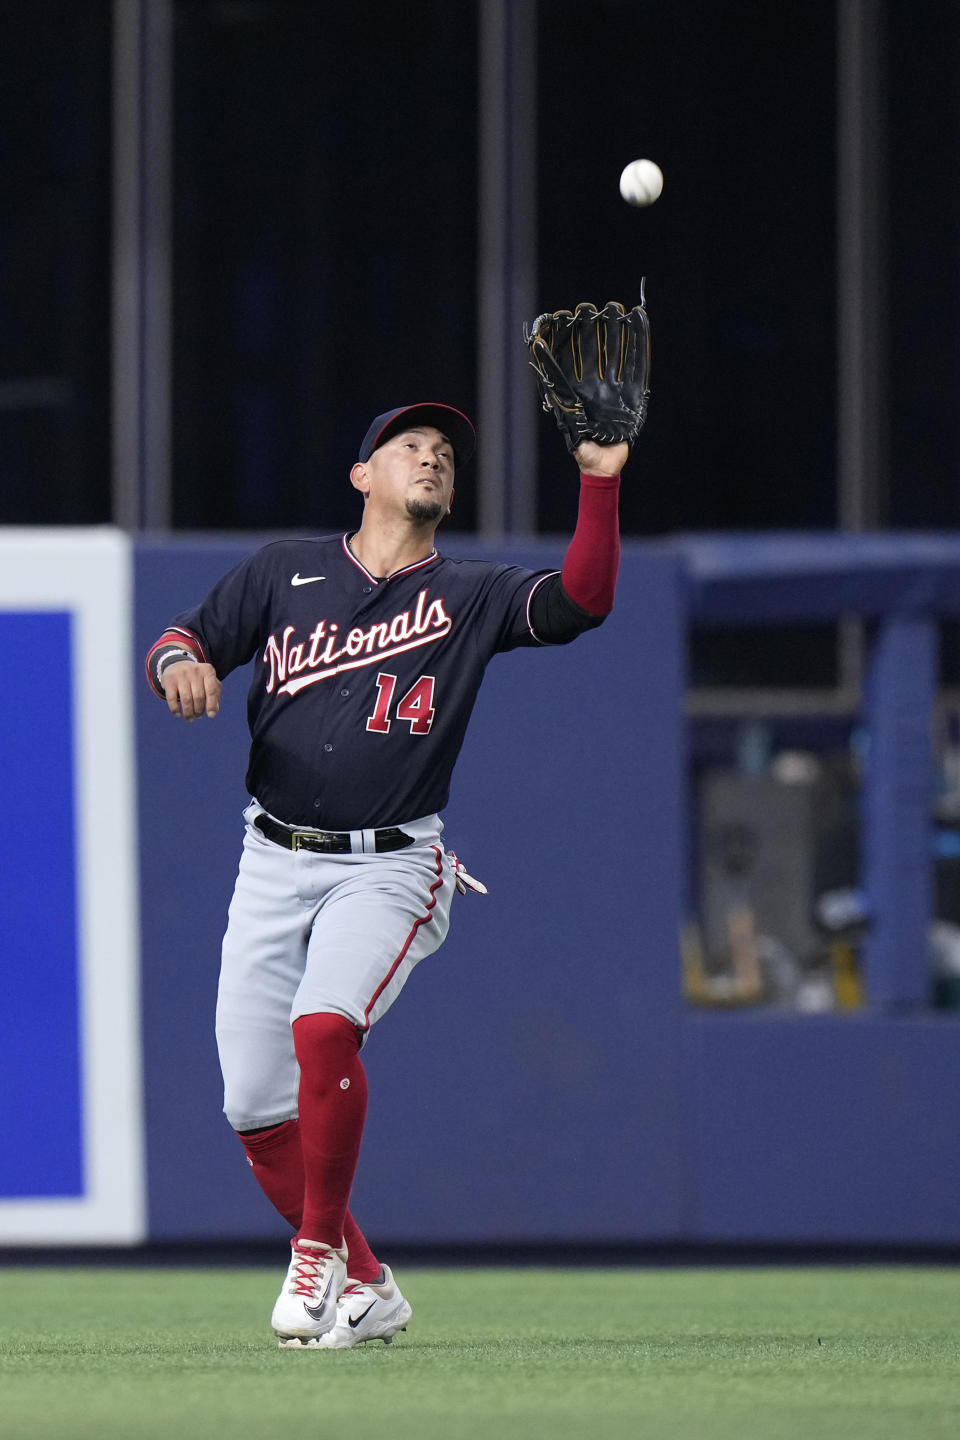 Washington Nationals left fielder Ildemaro Vargas catches a ball hit by Miami Marlins' Luis Arraez during the first inning of a baseball game, Friday, Aug. 25, 2023, in Miami. (AP Photo/Wilfredo Lee)